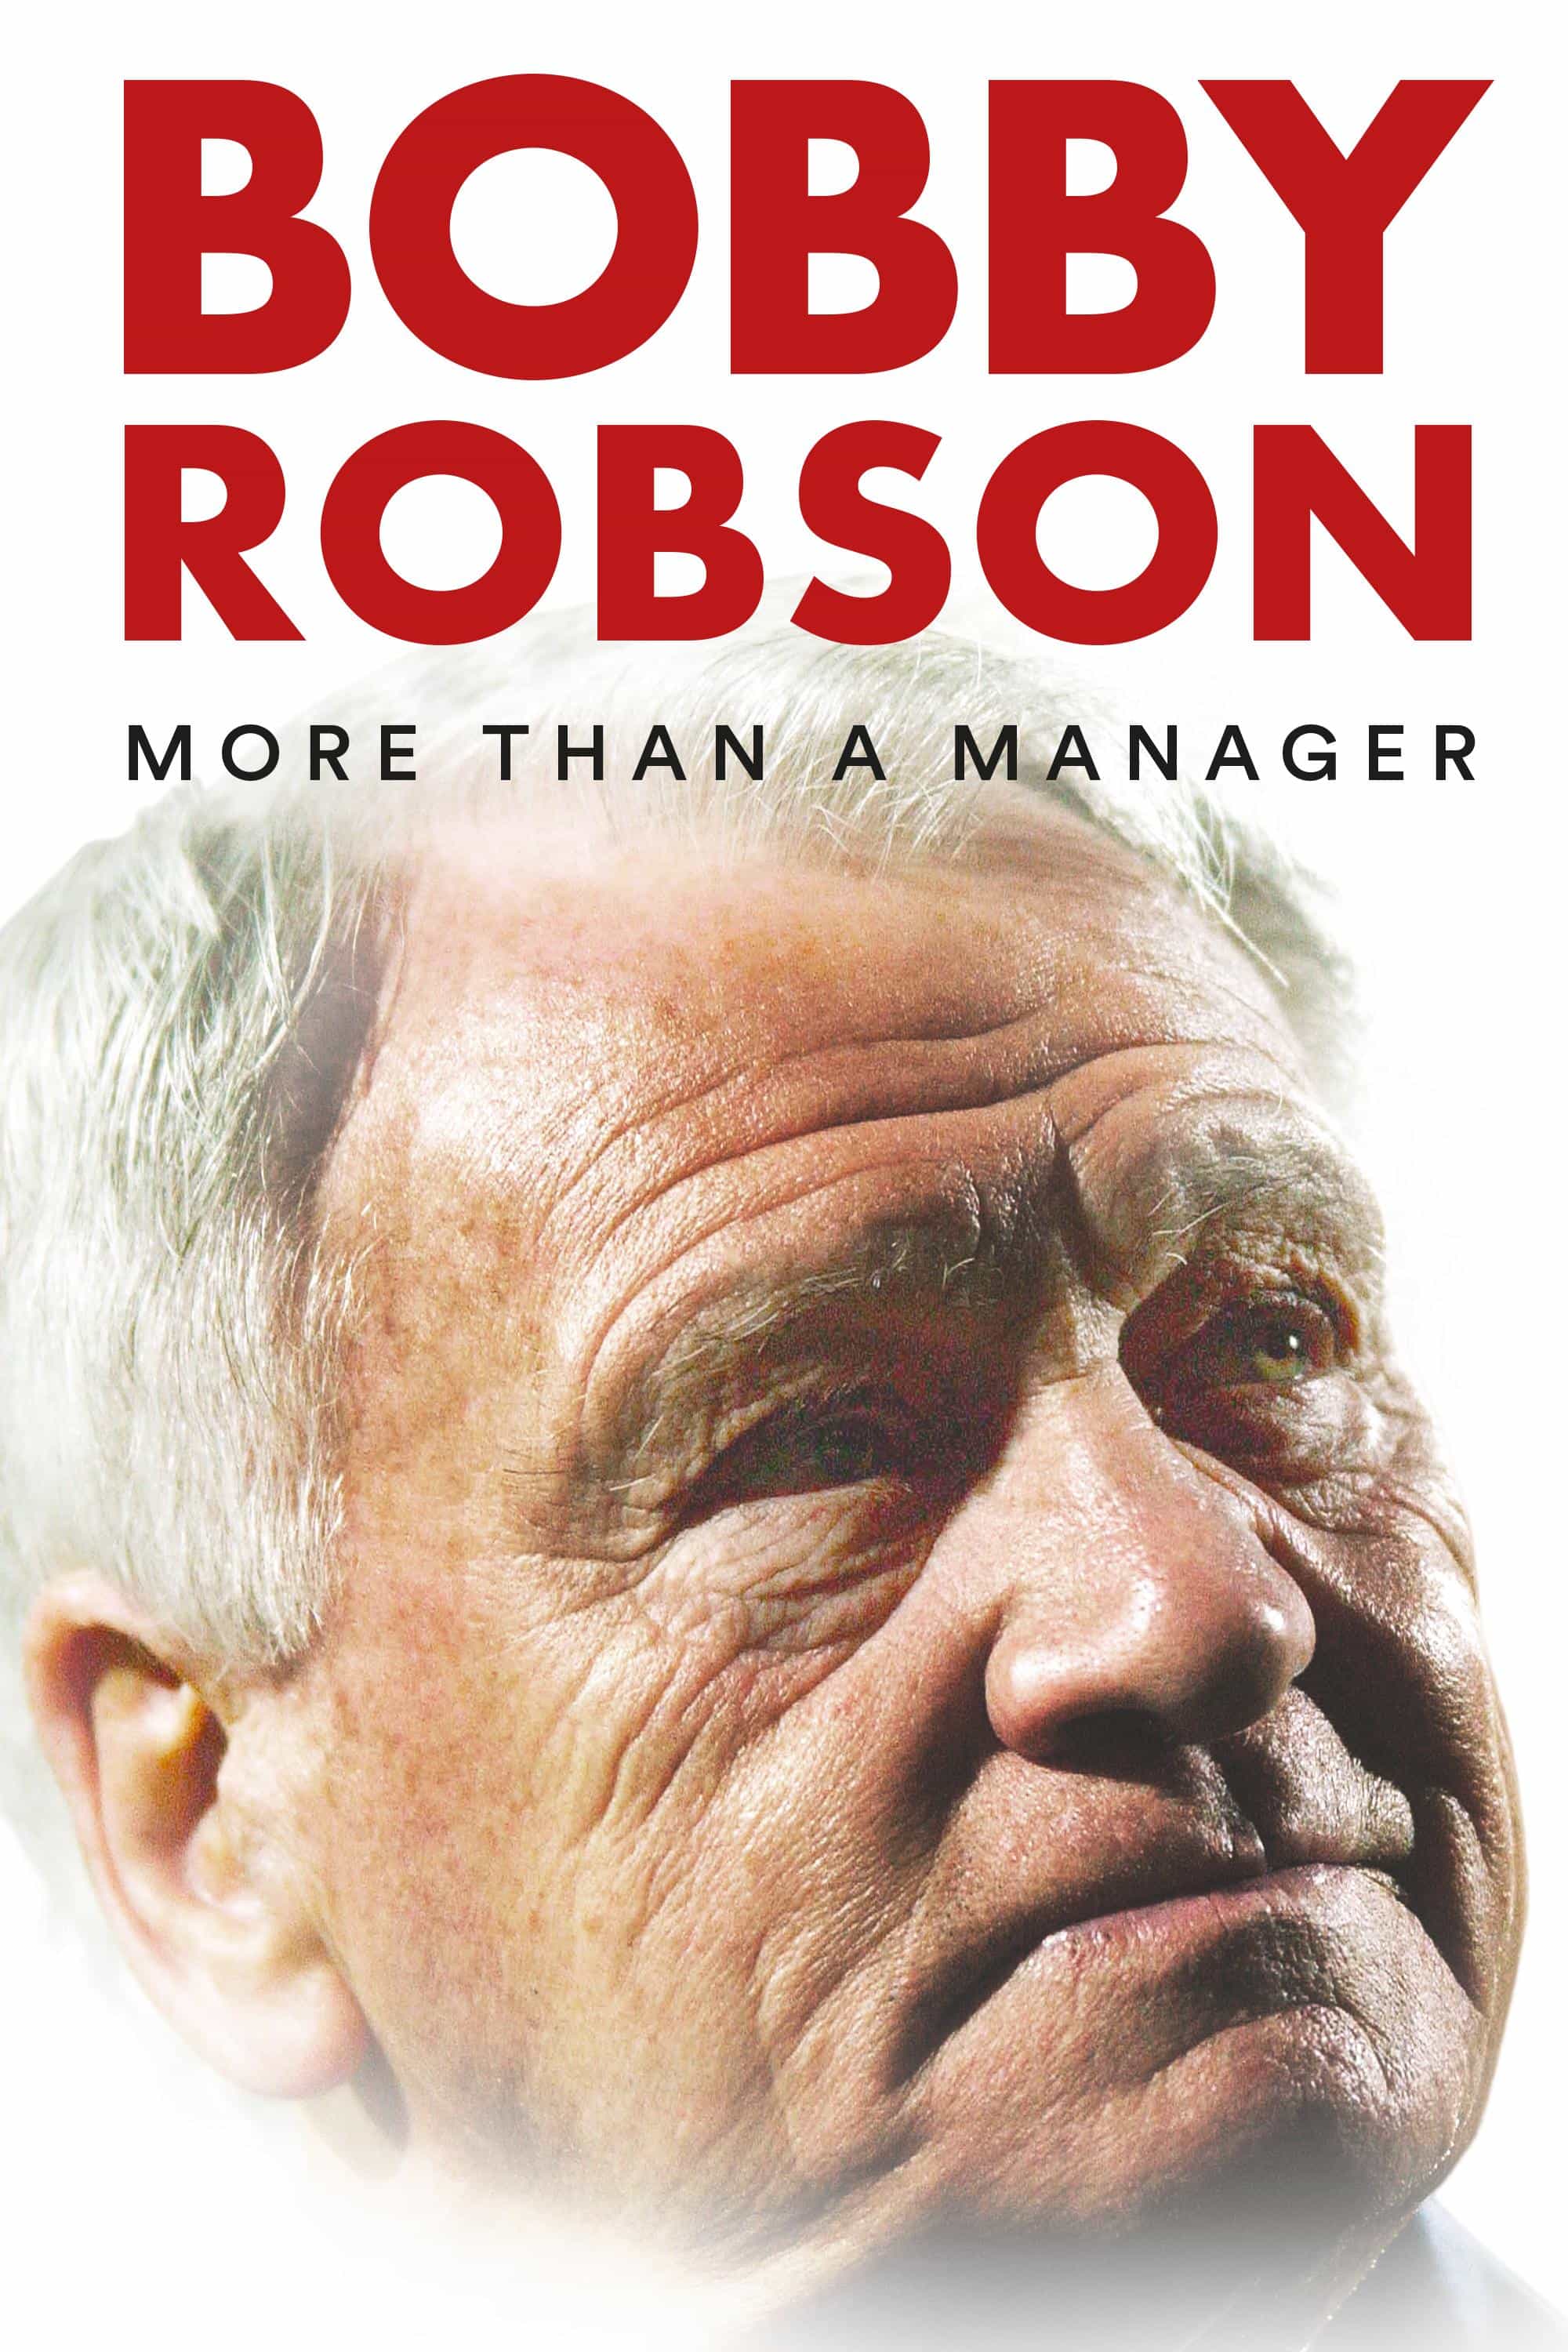 Bobby Robson More Than a Manager